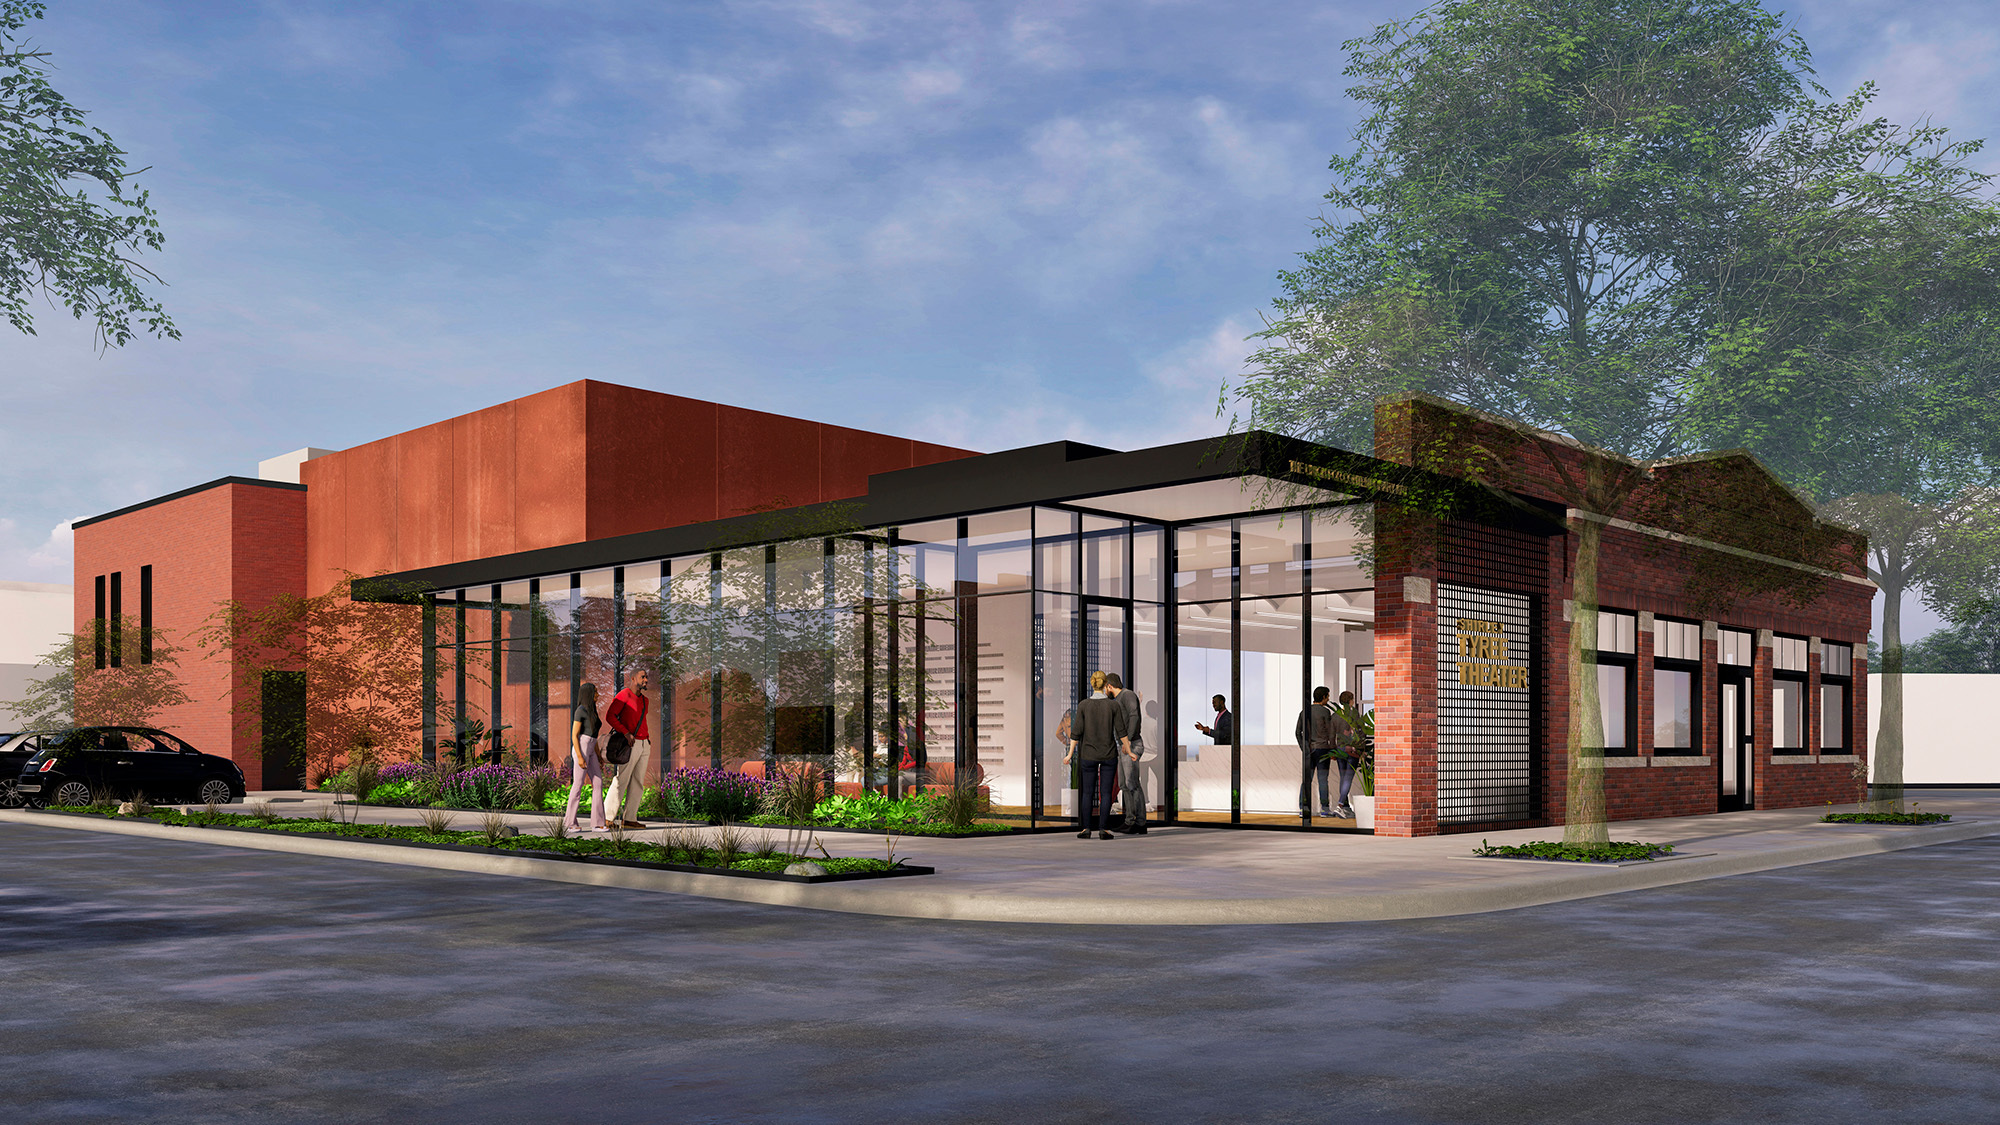 Architectural rendering of the Shirley Tyree Theater featuring a large glass entrance web